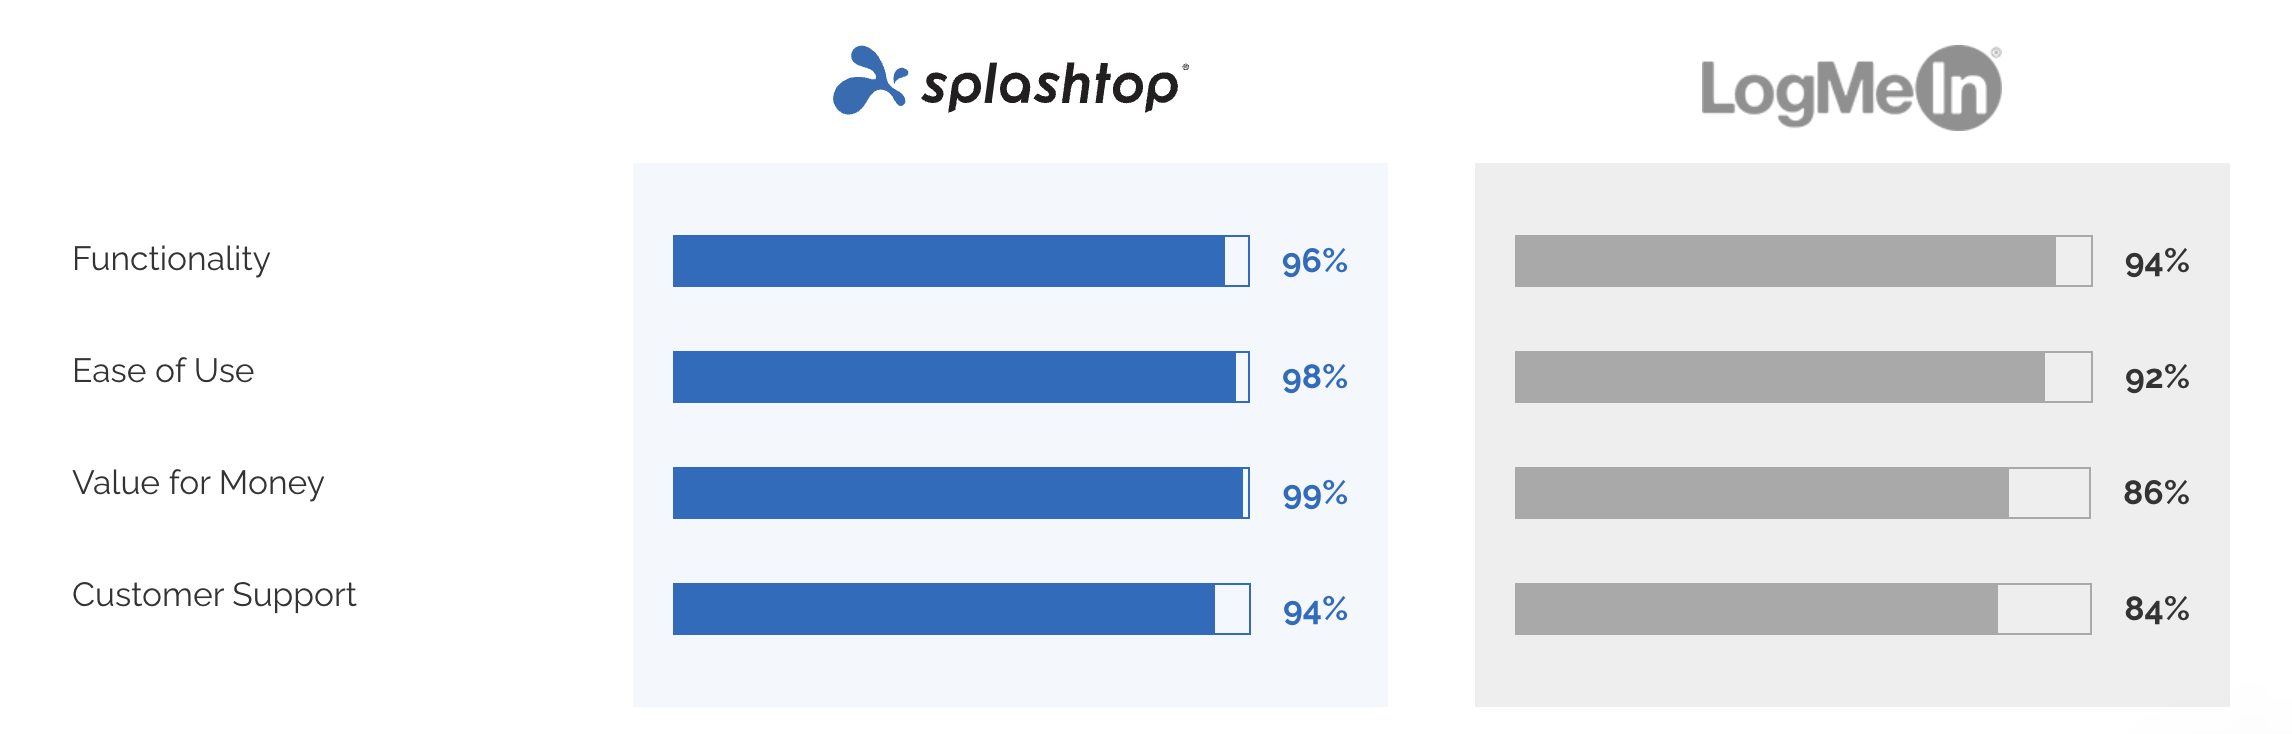 Splashtop scored higher than LogMeIn for functionality, ease of use, value for money, and customer support